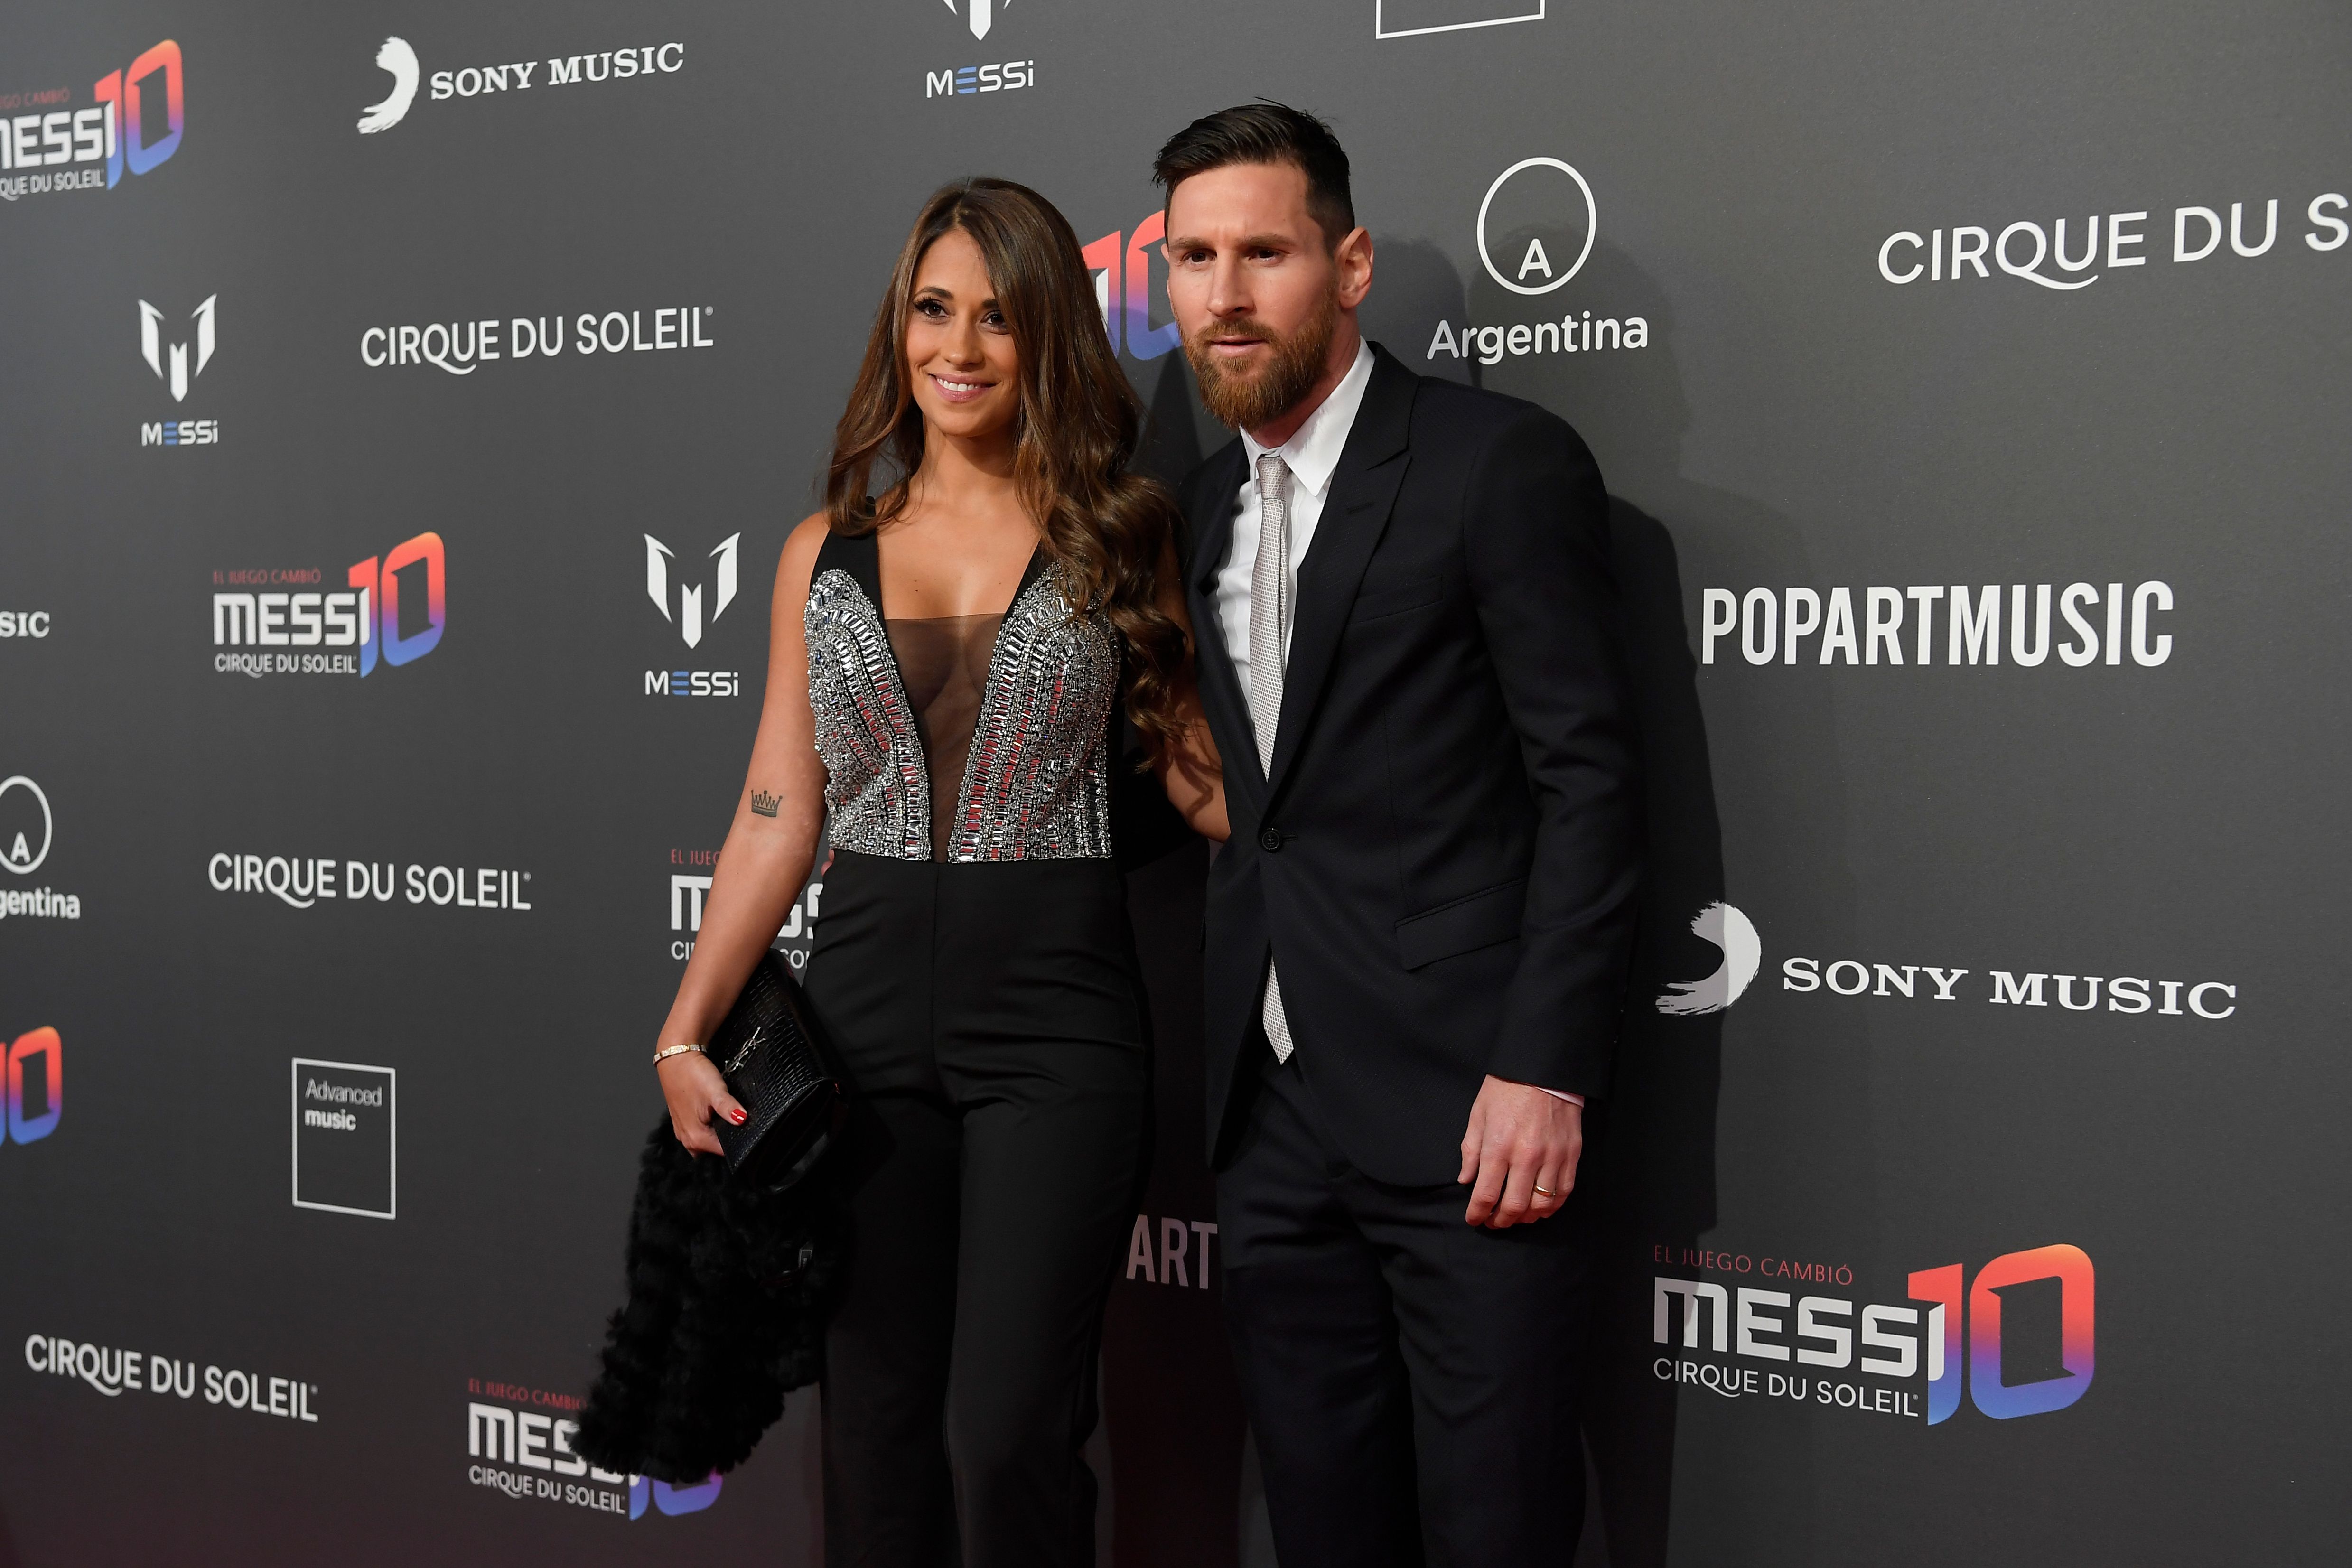 Lionel Messi and his wife Antonella Roccuzzo pose on the red carpet together during a photocall for Cirque du Soleil